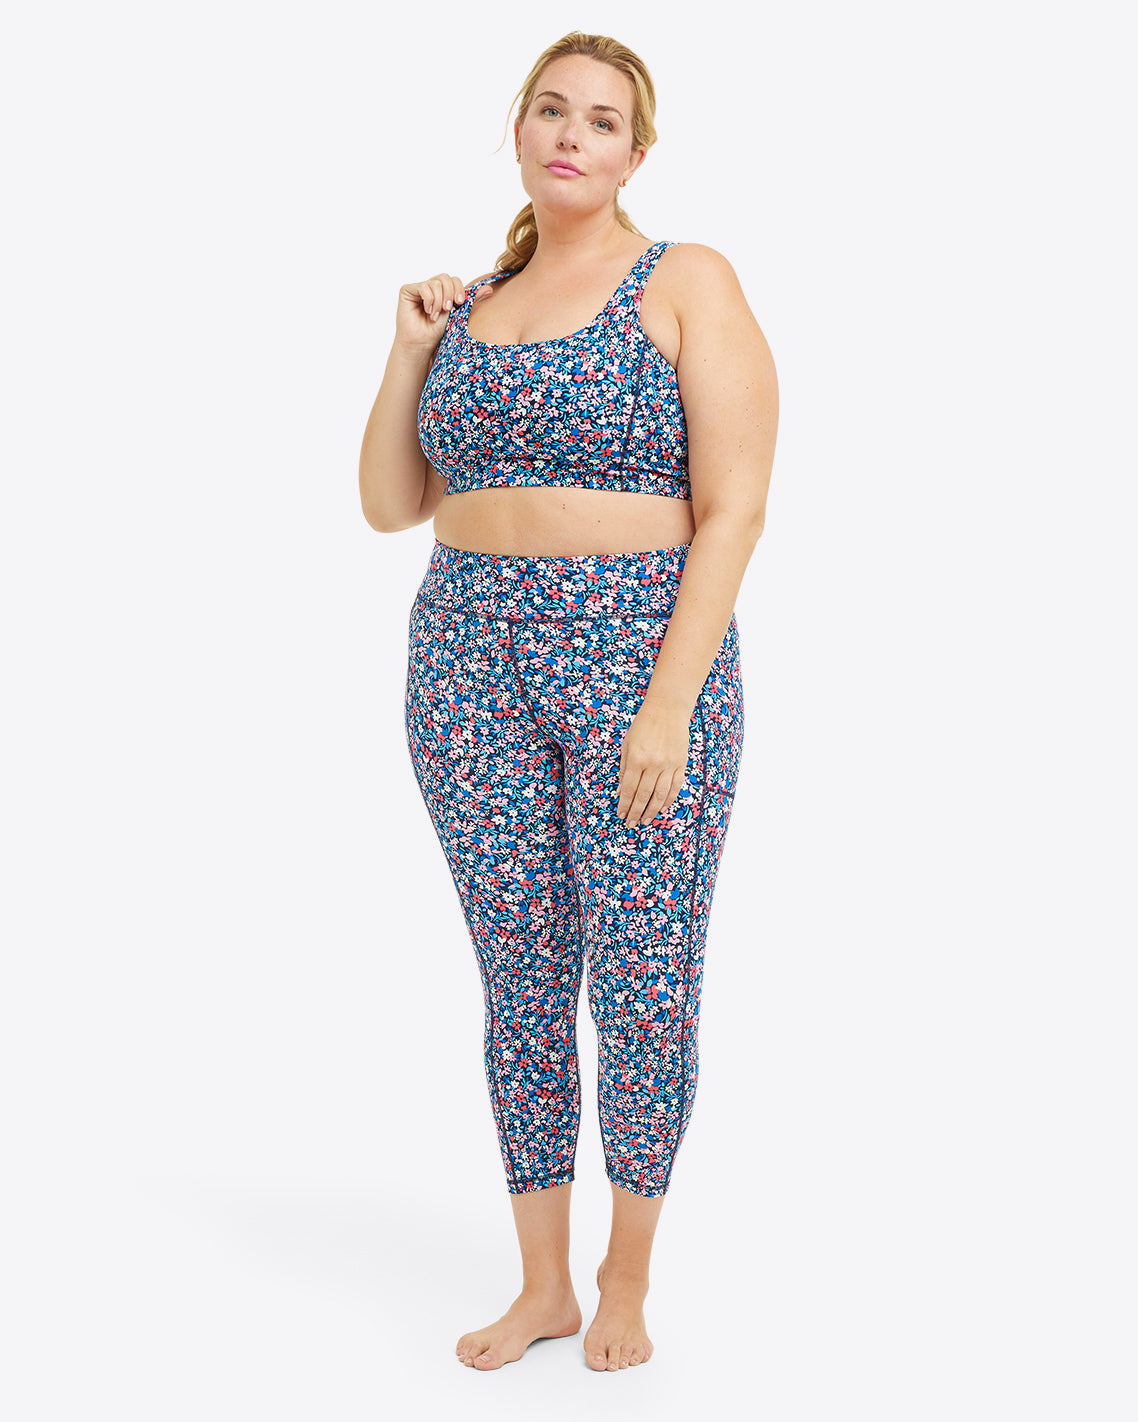 Plaid All-Over Print Sports Bra sold by Daisy